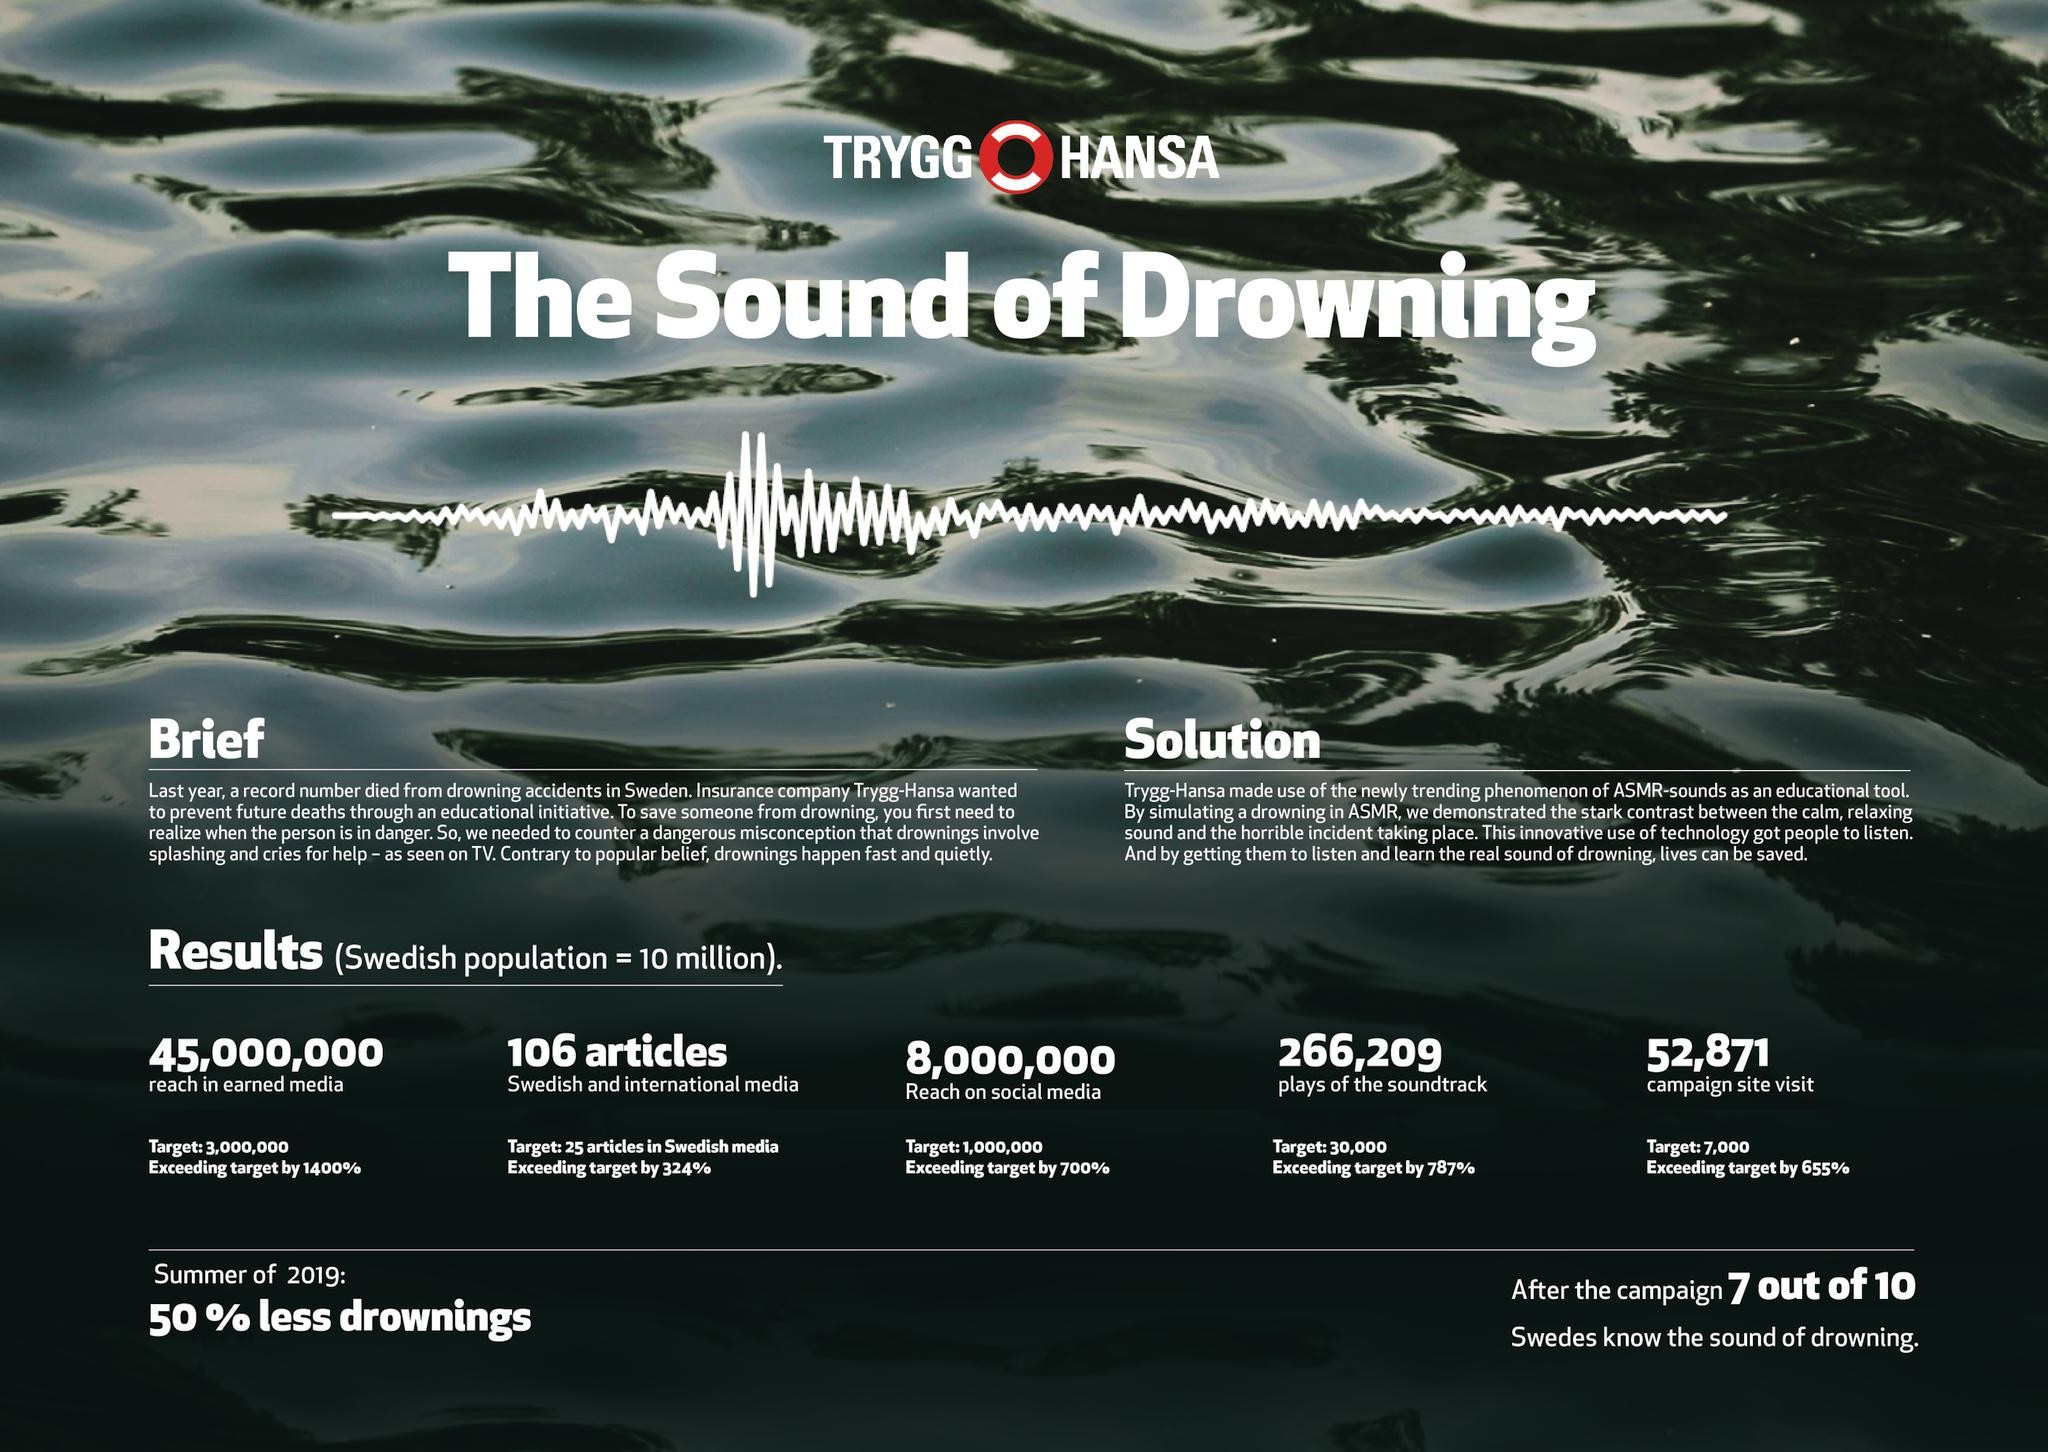 THE SOUND OF DROWNING